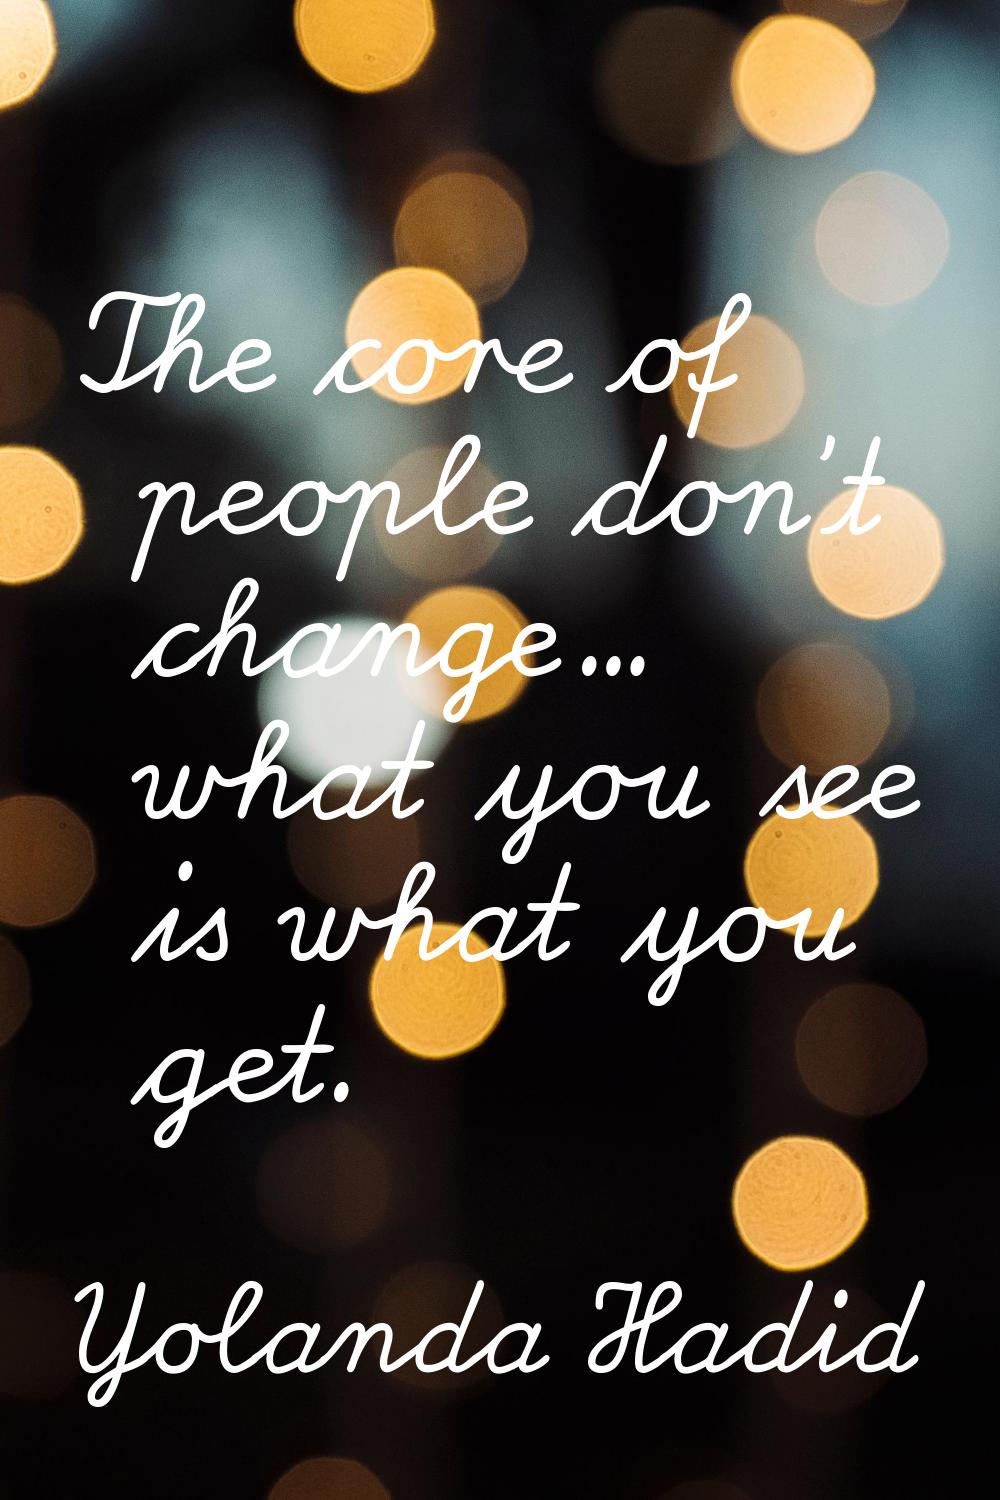 The core of people don't change... what you see is what you get.